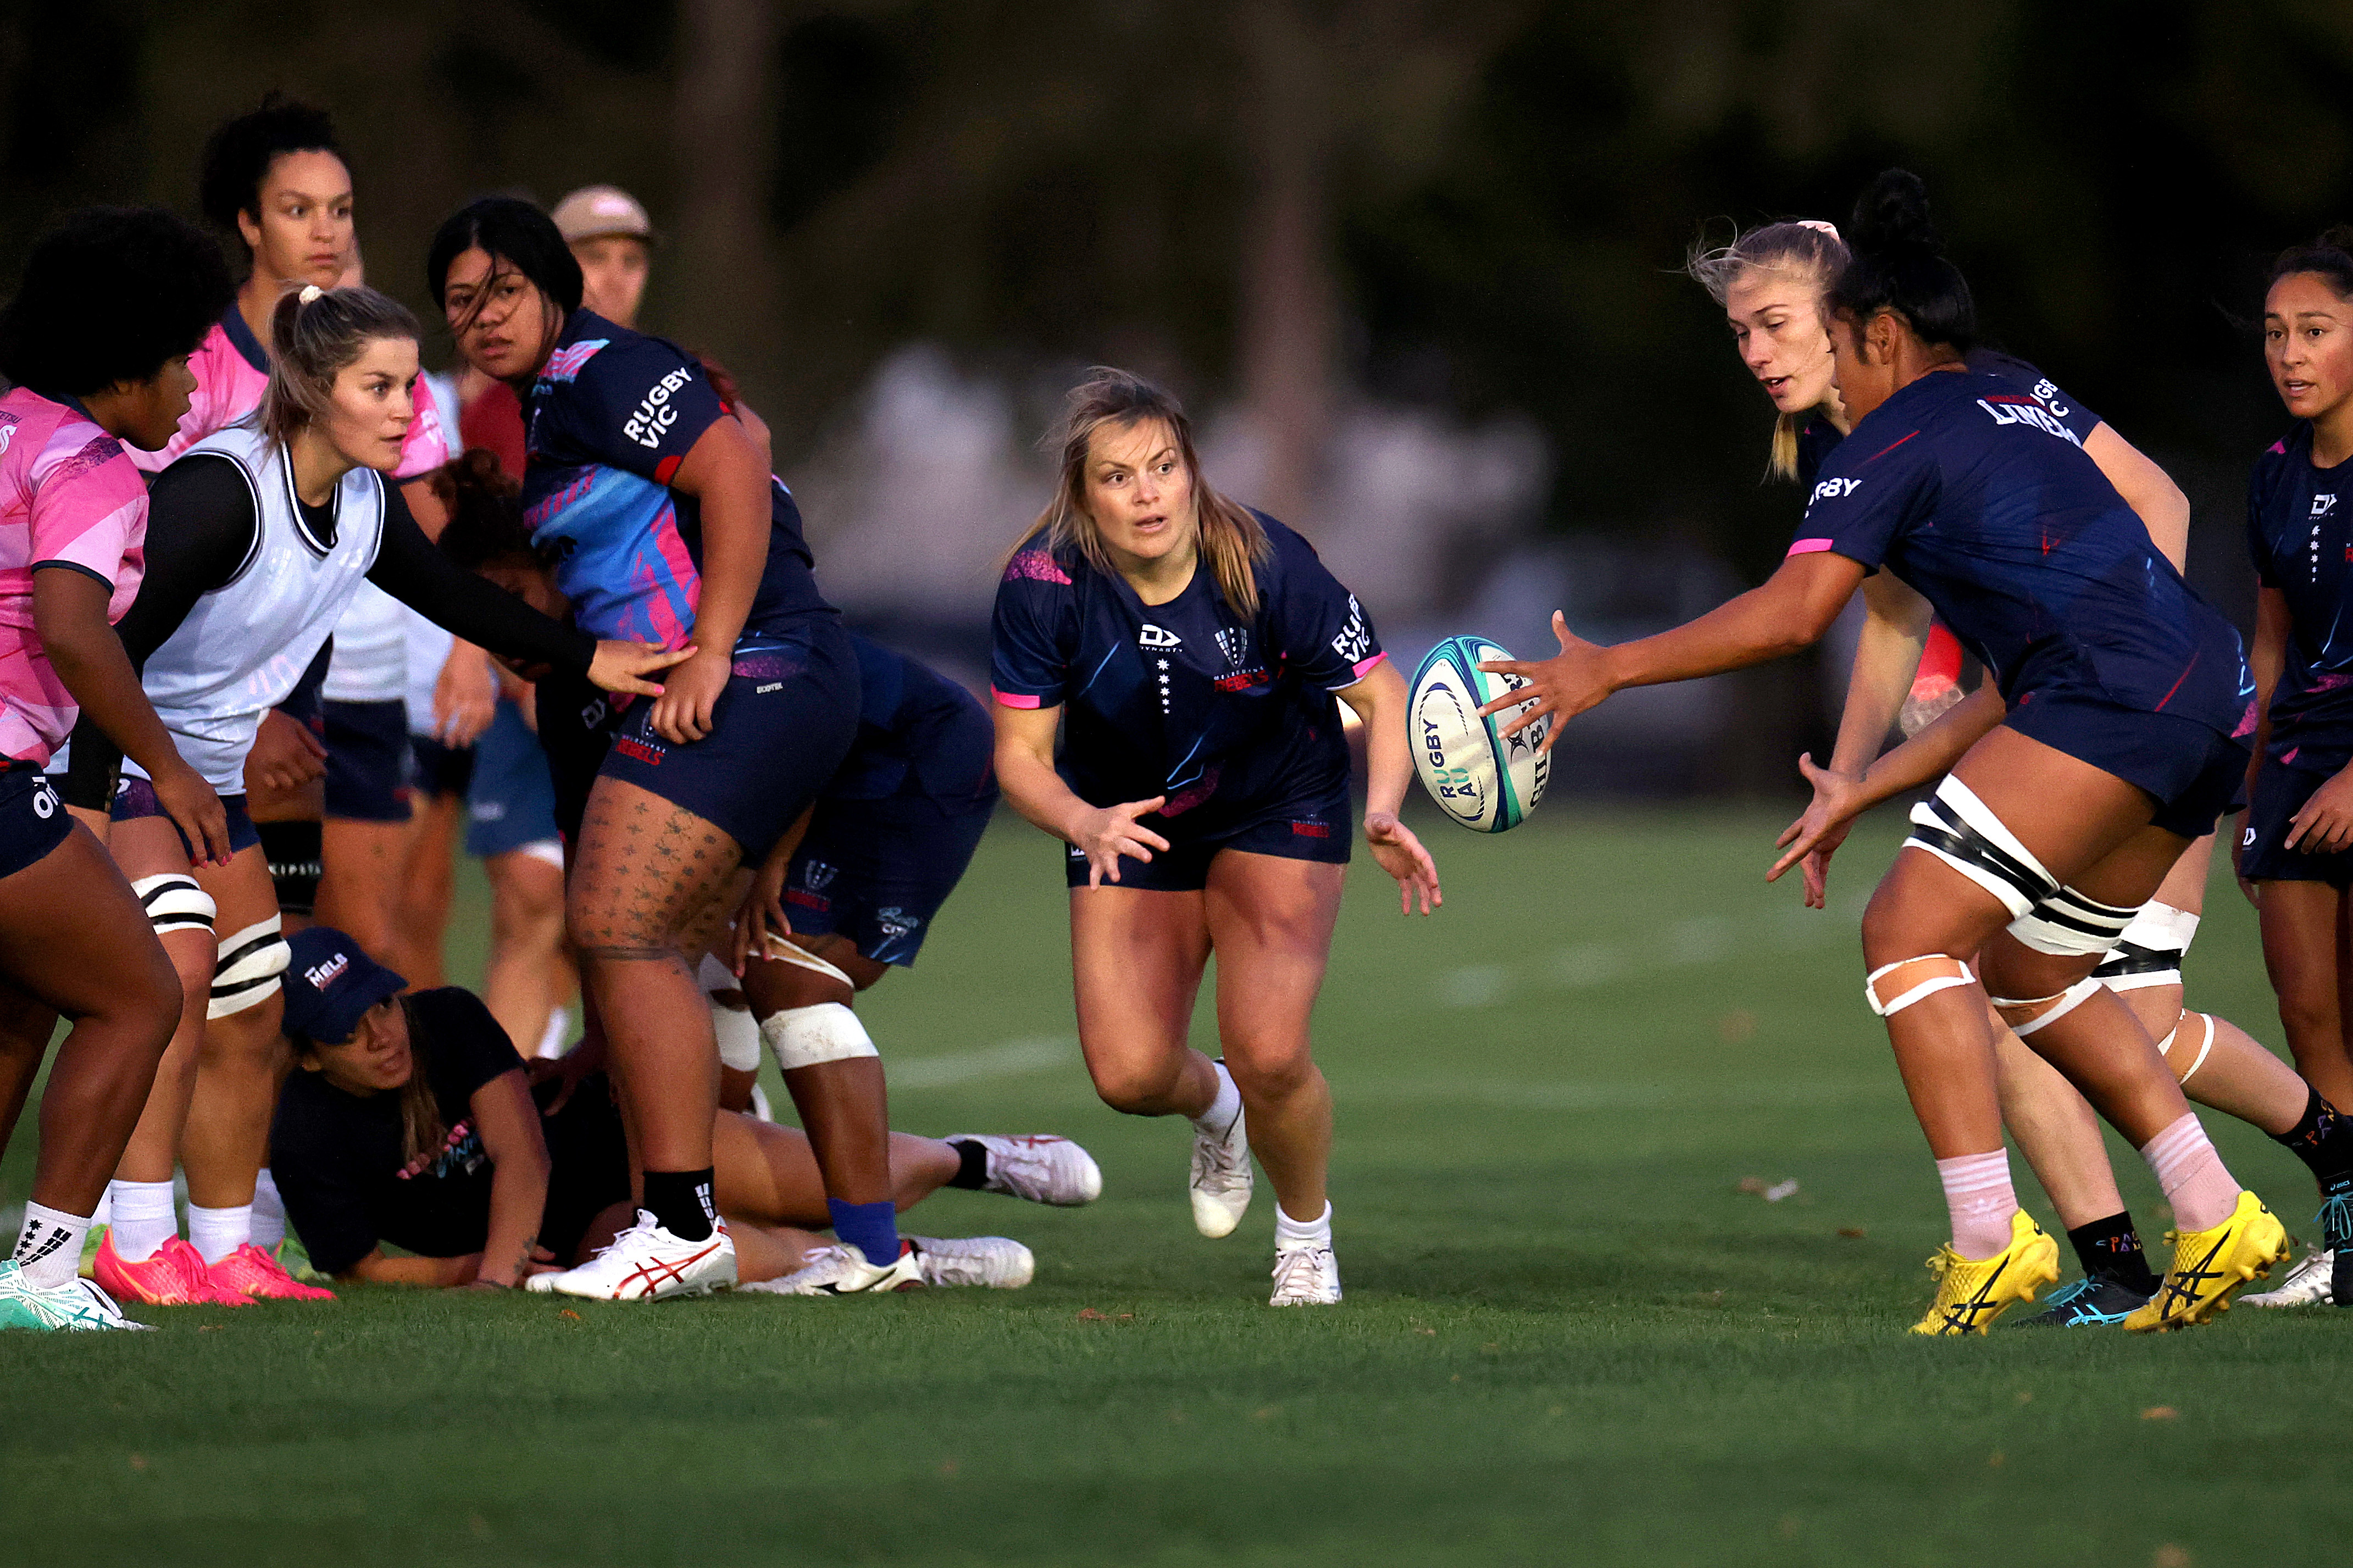 Grace Hamilton of the Rebels passes during a Melbourne Rebels Super Rugby Women's training session.